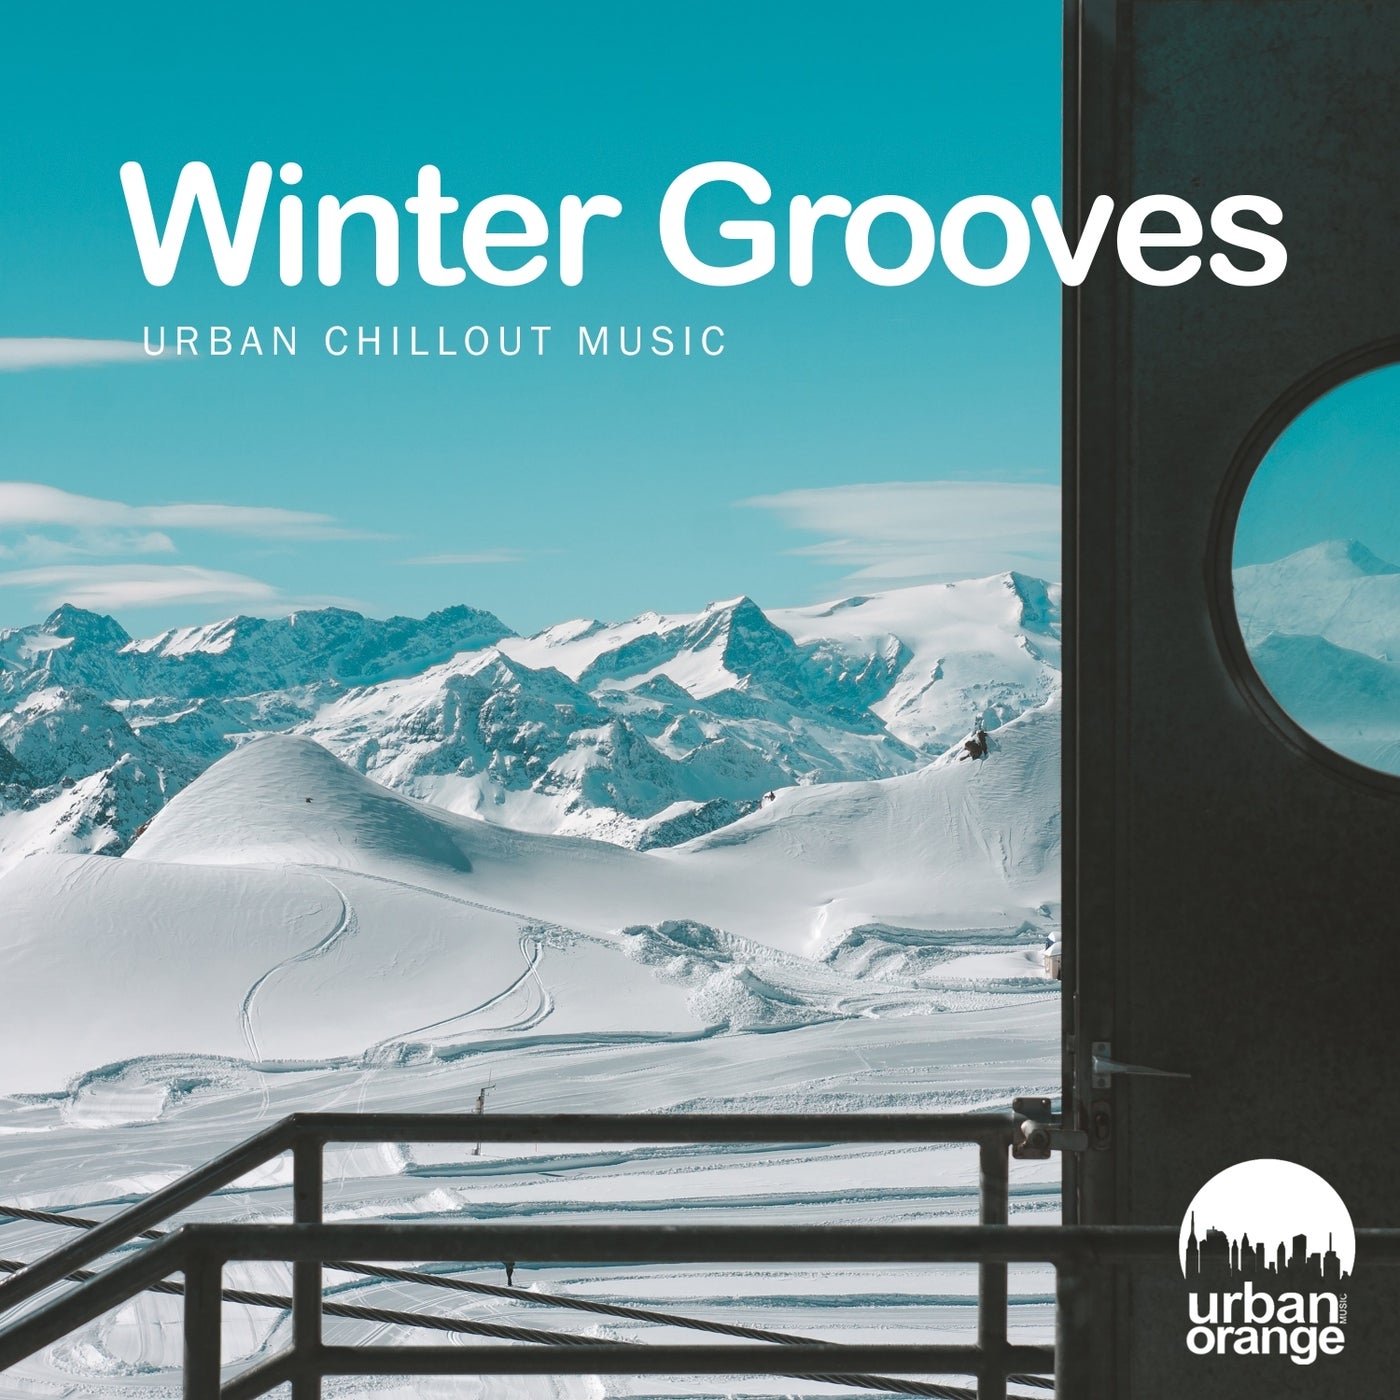 Winter Grooves (Urban Chillout Music)